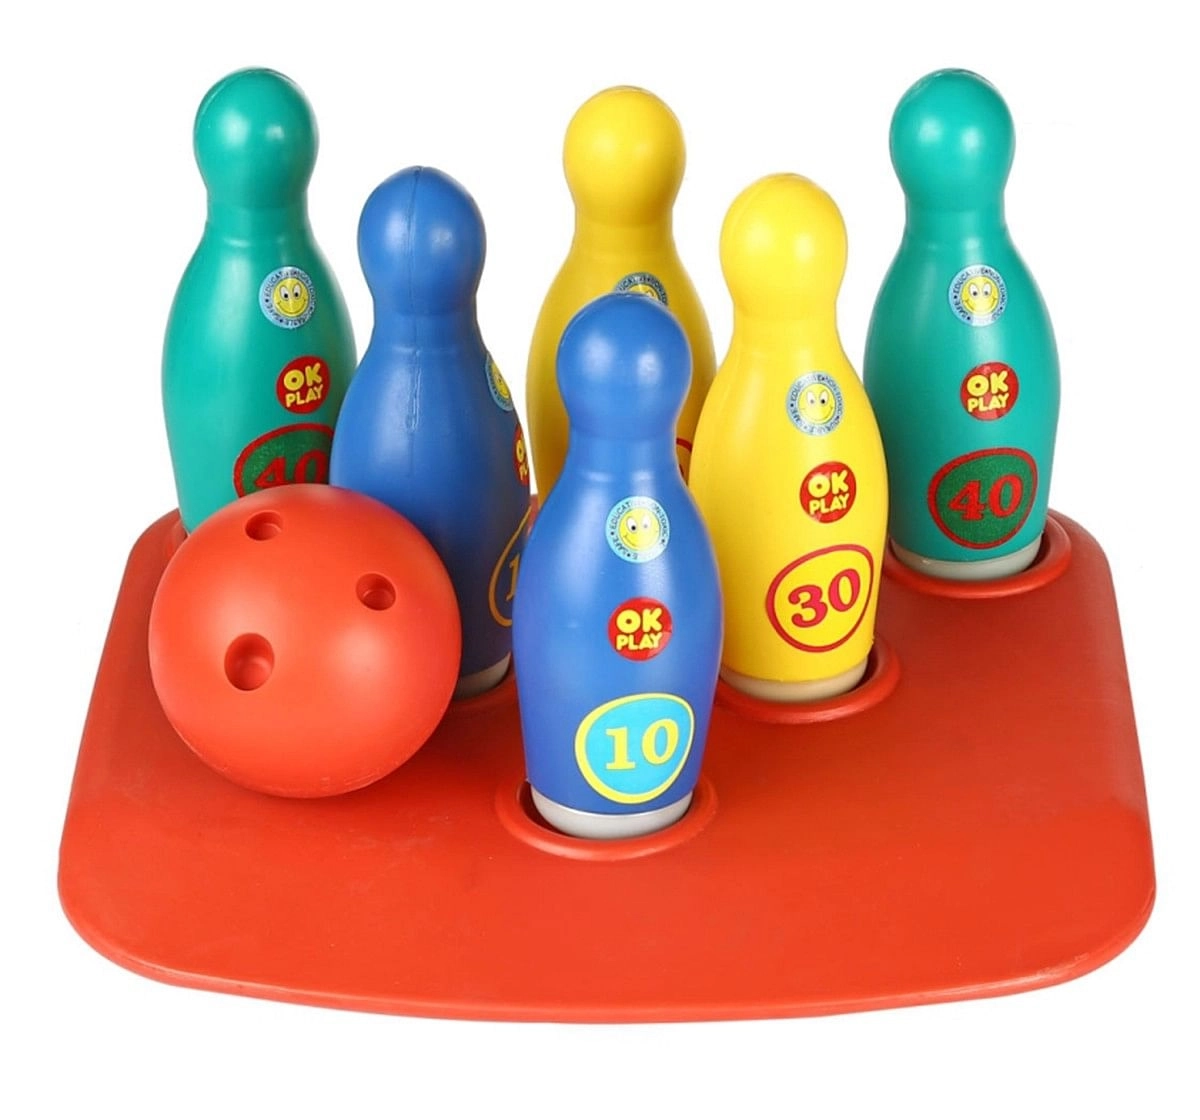 Ok Play Bowling Alley Bowling Game Set for Kids Multicolor 3Y+